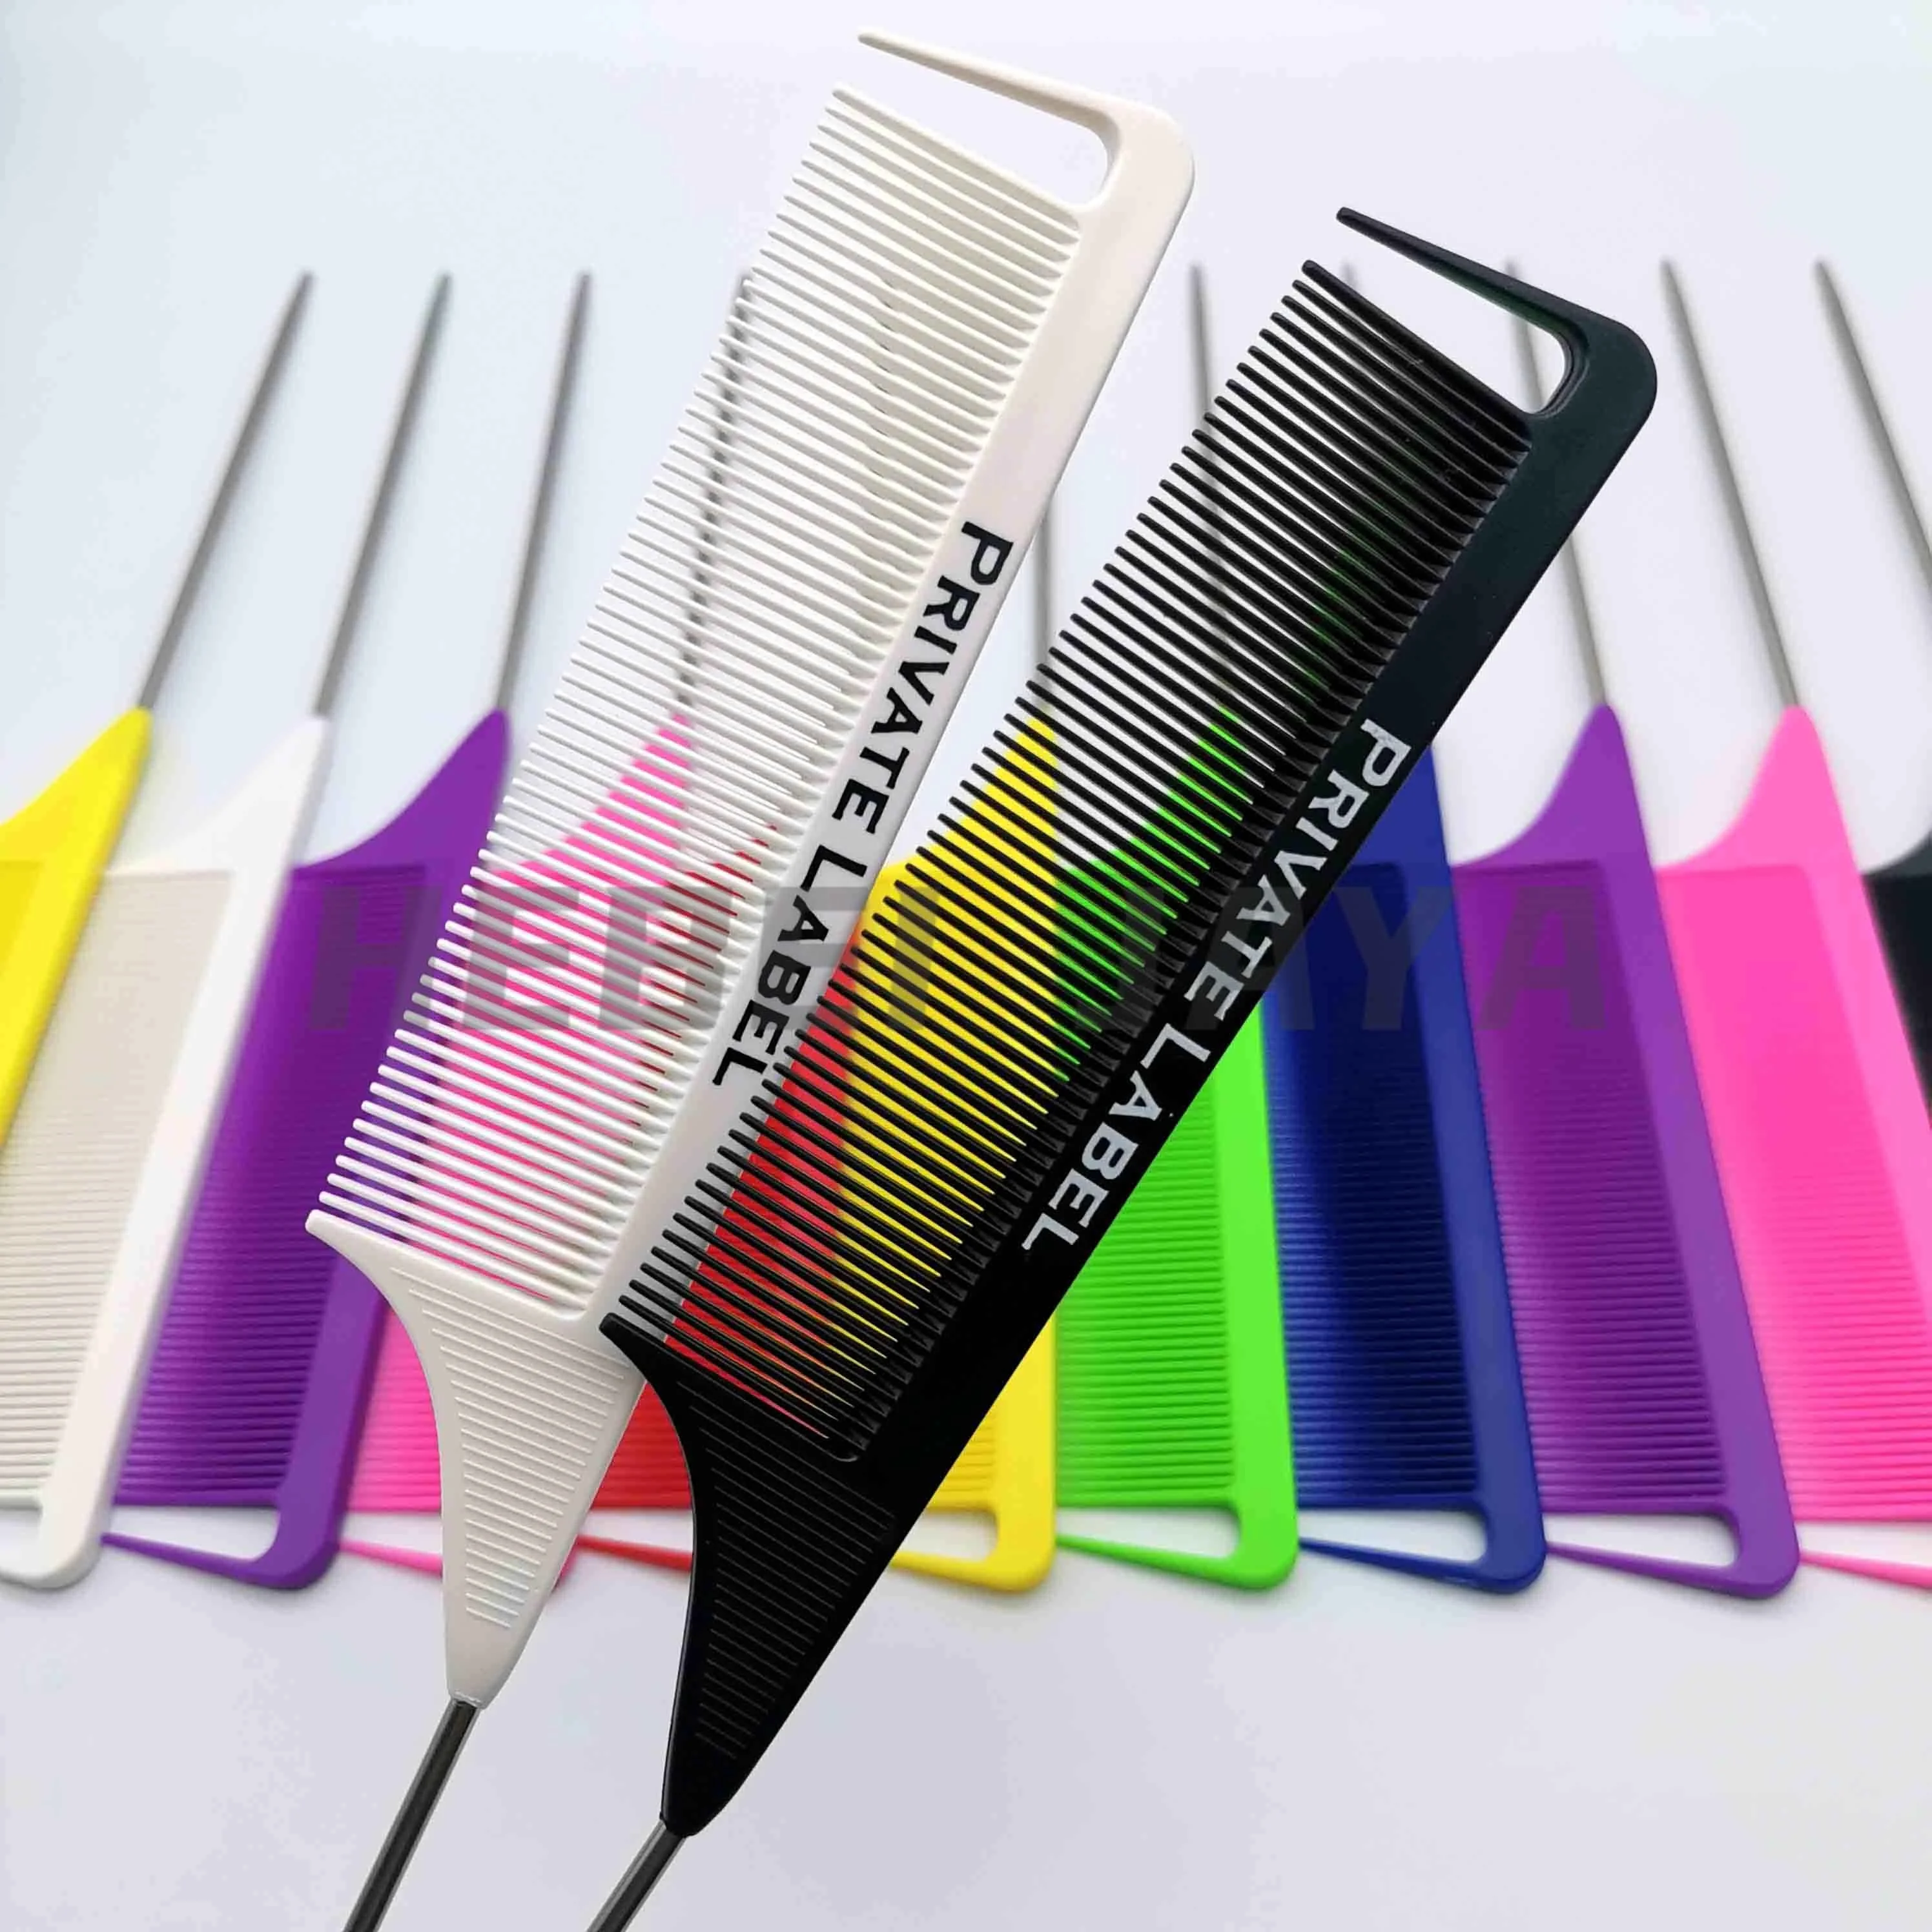 

Hot sale antistatic heat resistant carbon peine hair precision rat tail parting comb with private label, Customized color